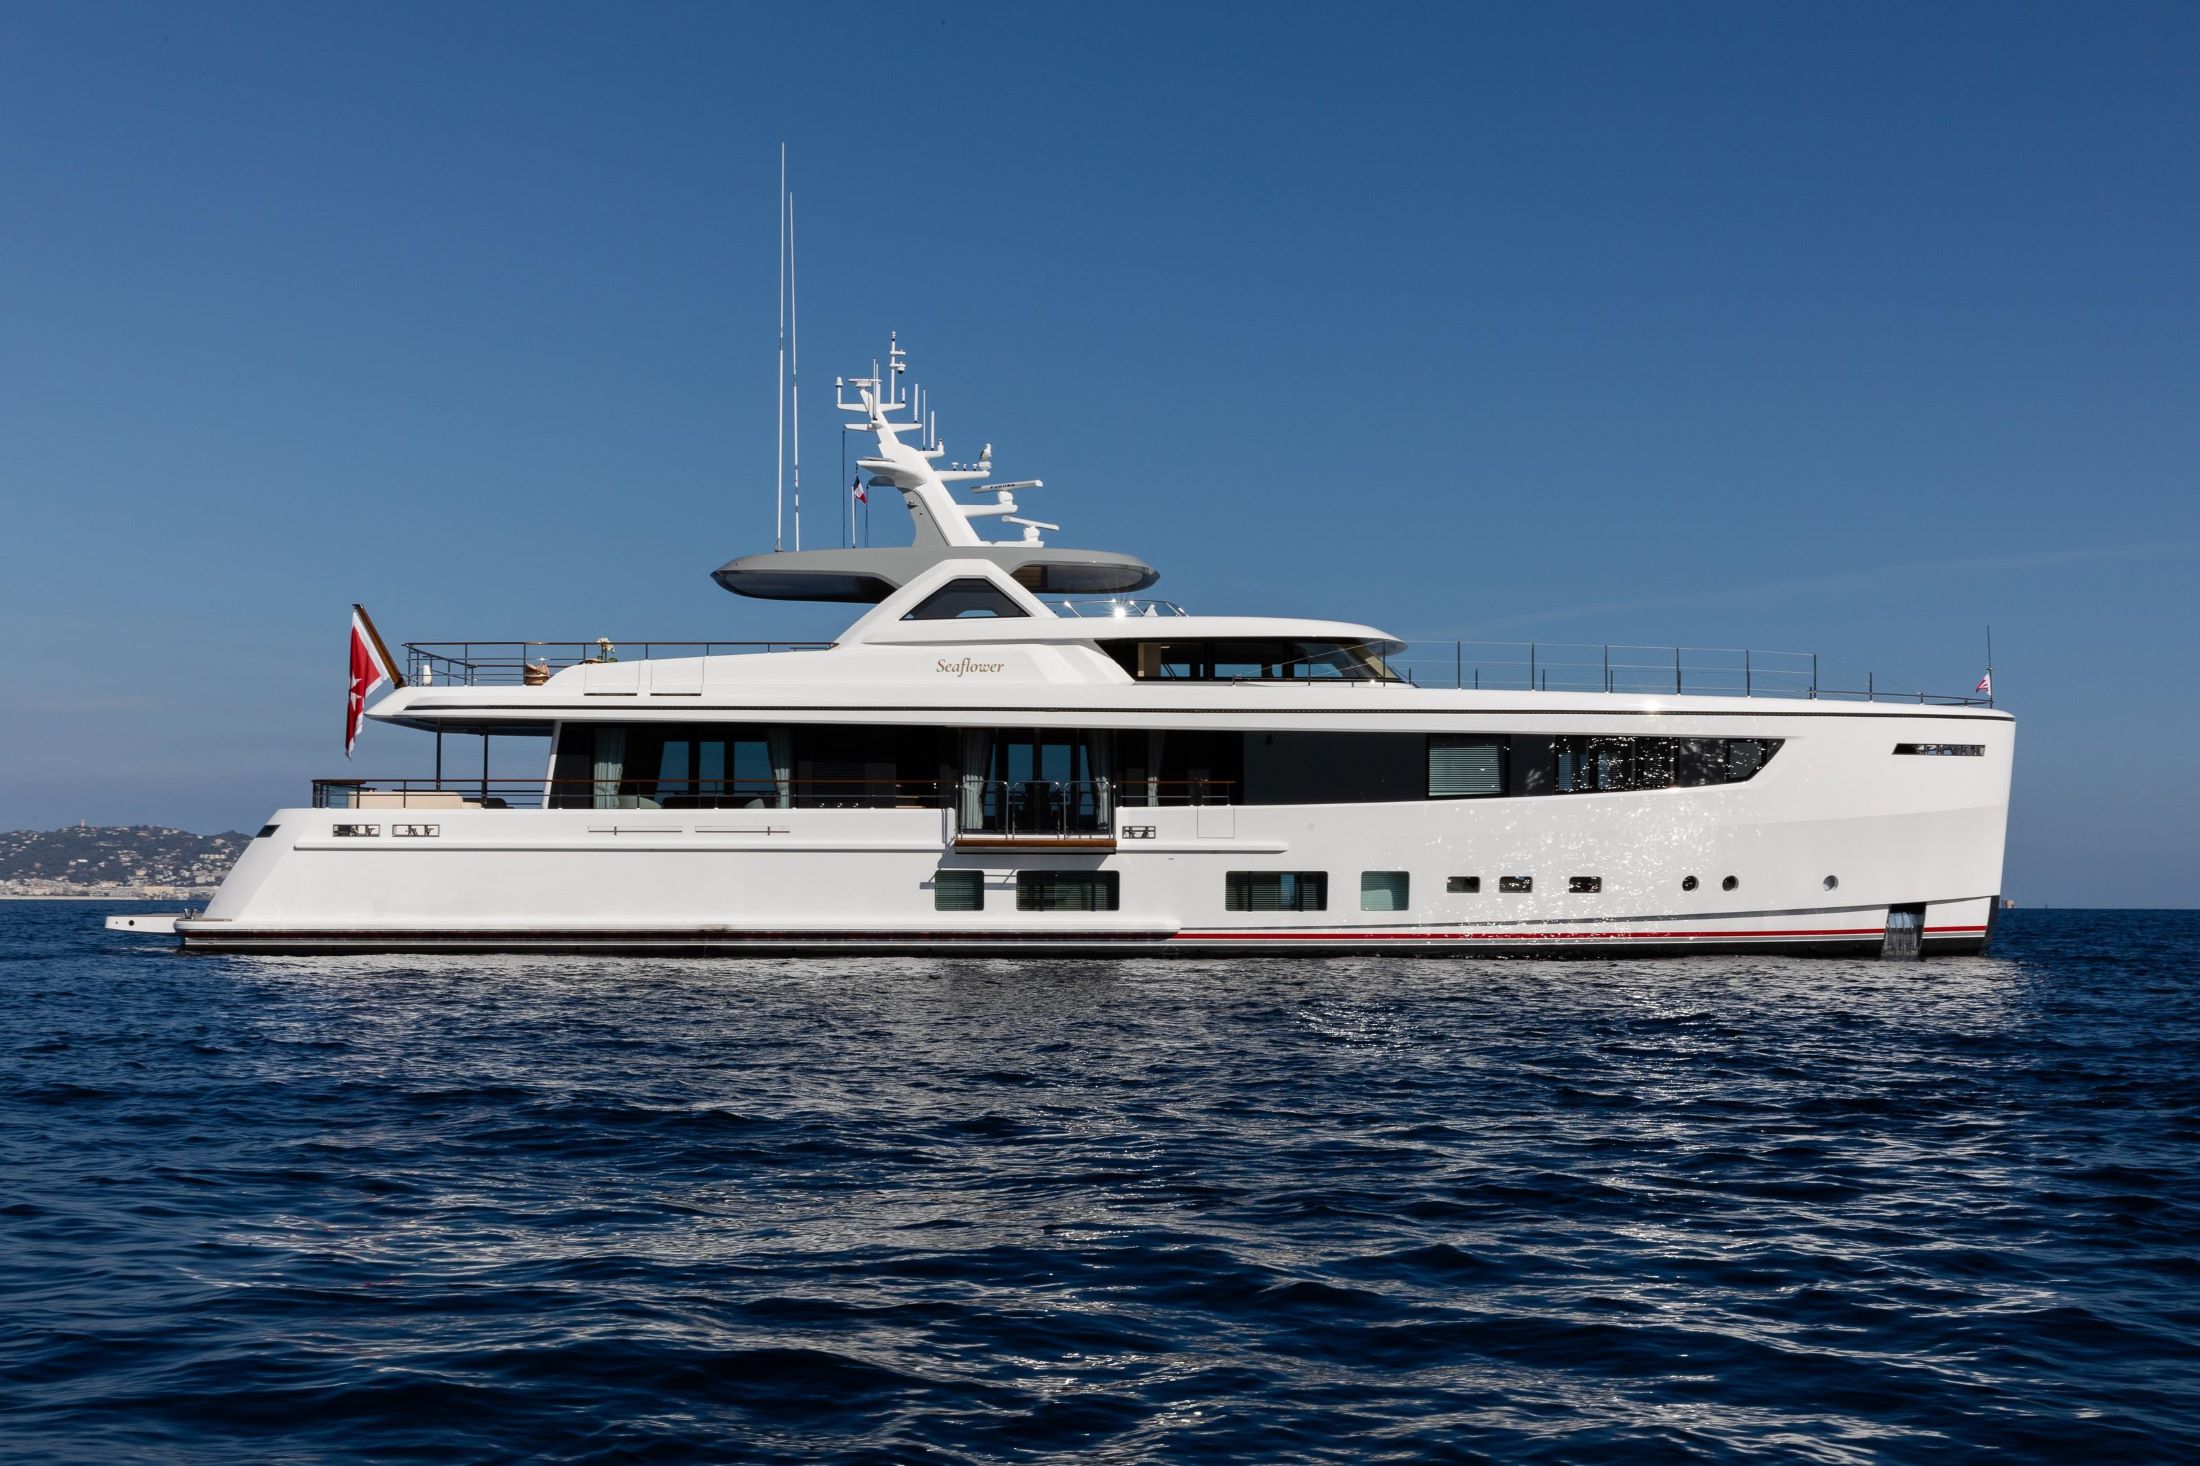 Seaflower Is an Award - Winning Superyacht With a Slender Silhouette and Tasteful Interiors